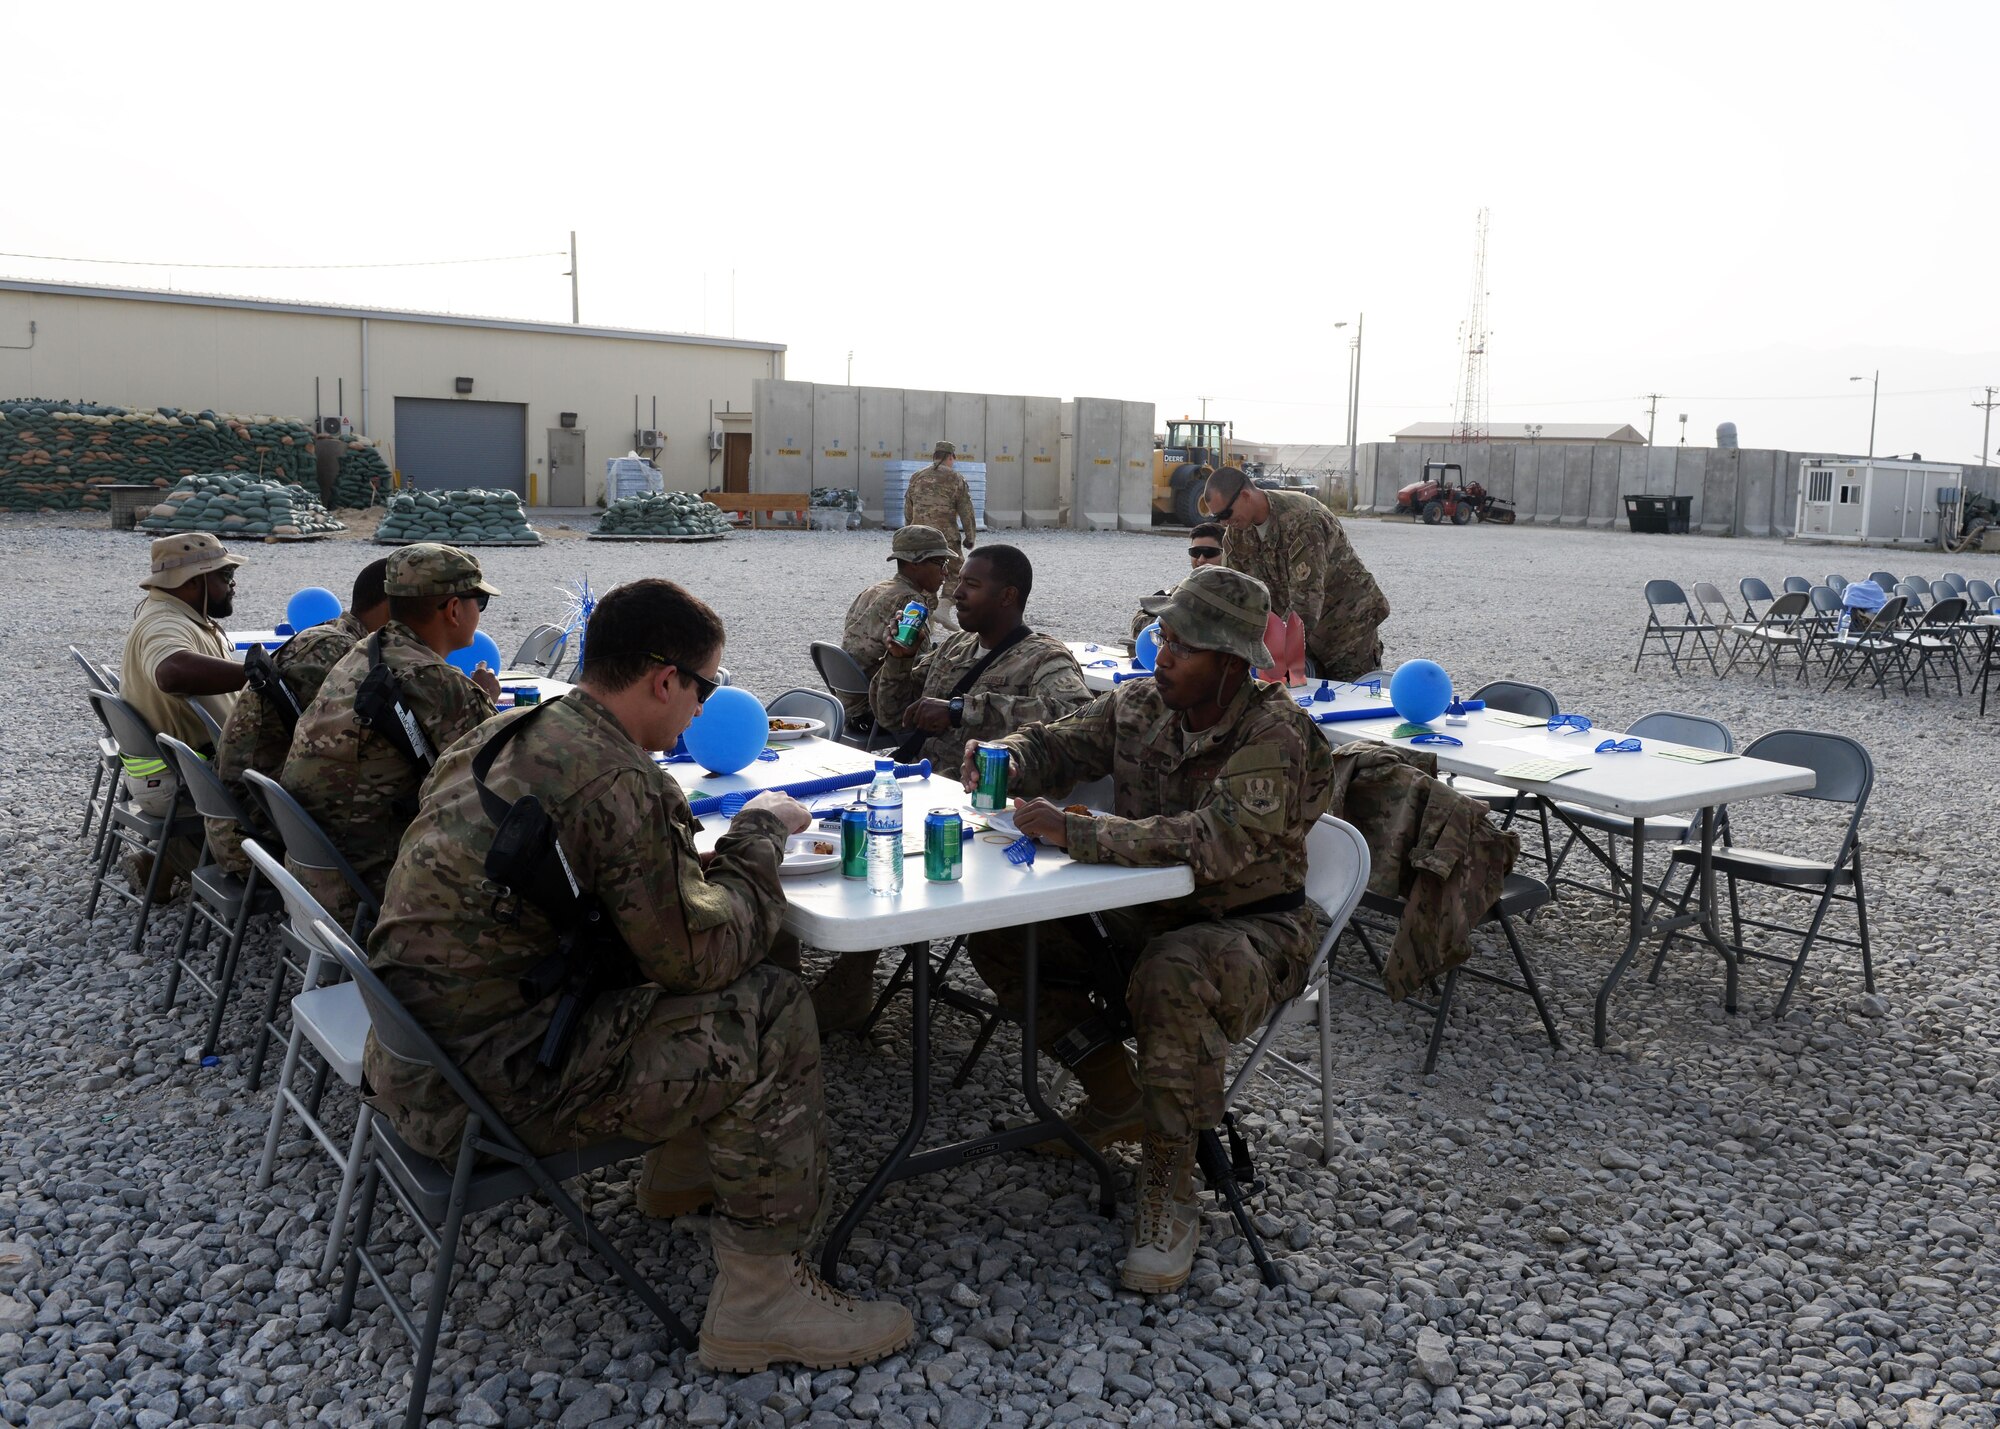 U.S. Airmen assigned to the 455th Air Expeditionary Wing gather at a block party held in honor of the Air Force’s 68th birthday Sept. 18. 2015, at Bagram Airfield, Afghanistan. The block party which was hosted by the Armed Forces Committed to Excellence council, the 455th Force Support Squadron and other private organizations featured games, food and a traditional AF cake cutting ceremony. (U.S. Air Force photo by Senior Airman Cierra Presentado/Released)